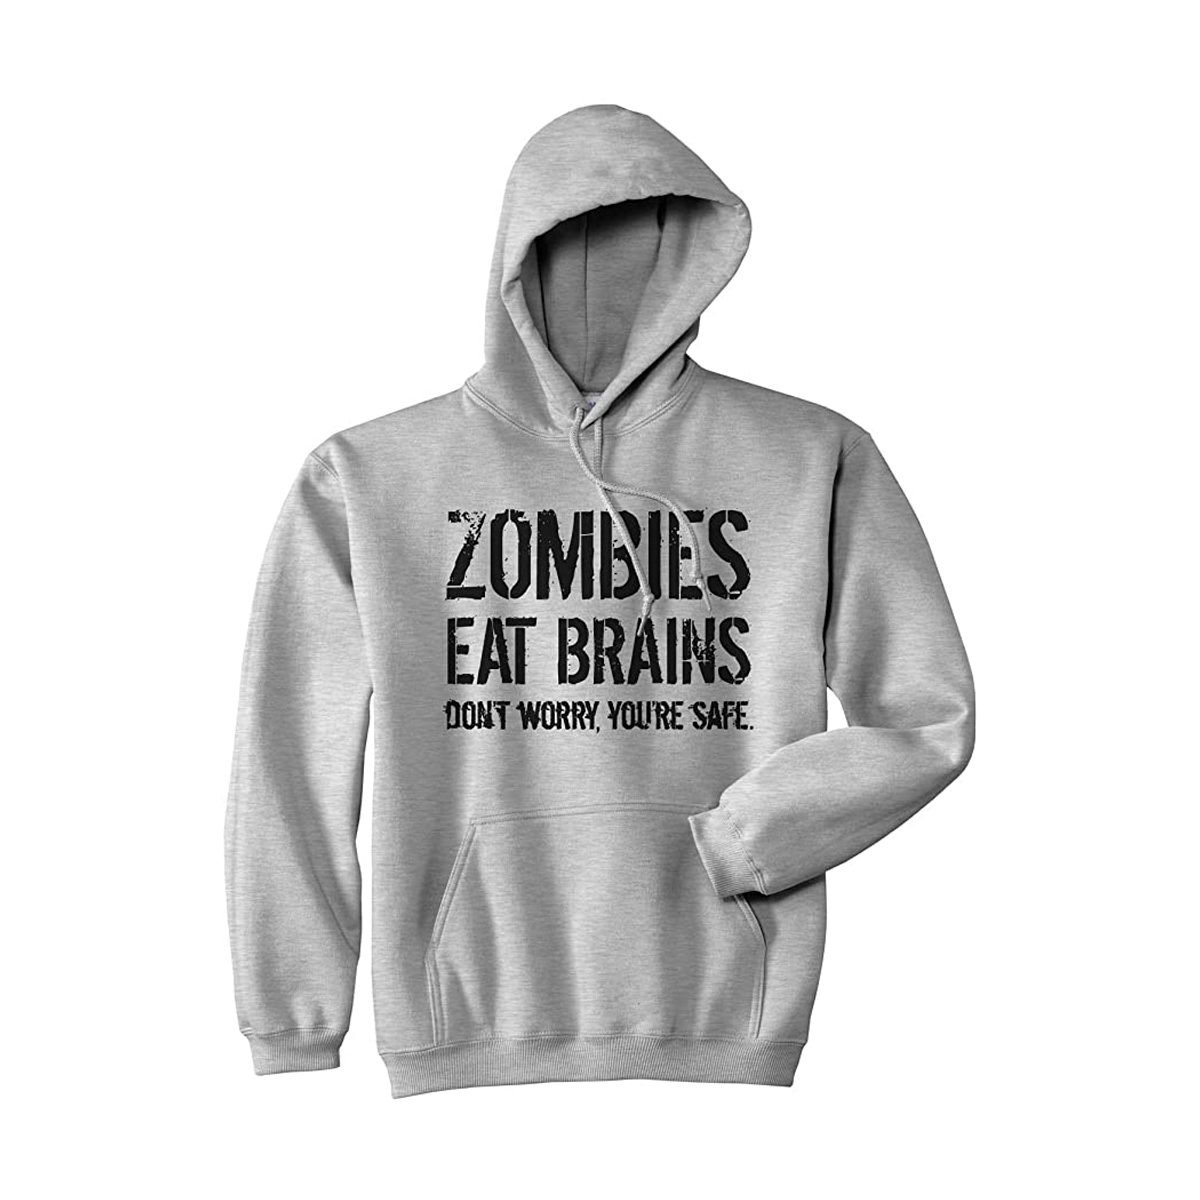 Zombies Eat Brains Don't Worry, You're Safe Sweatshirt